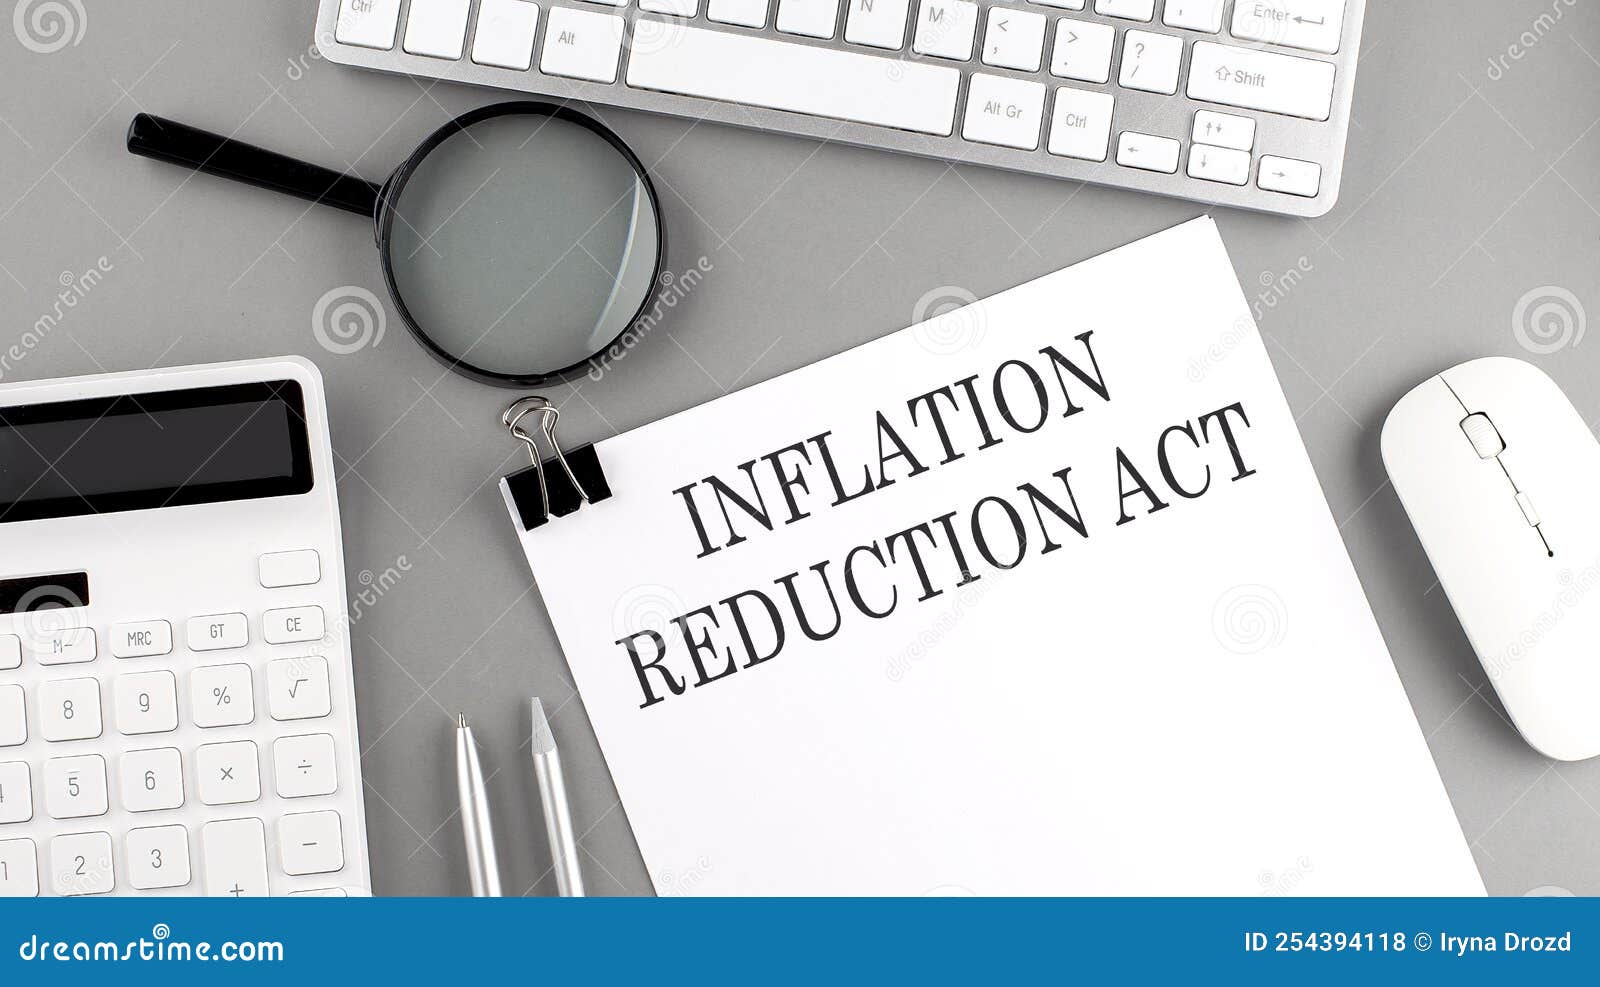 inflation reduction act written on paper with office tools and keyboard on the grey background